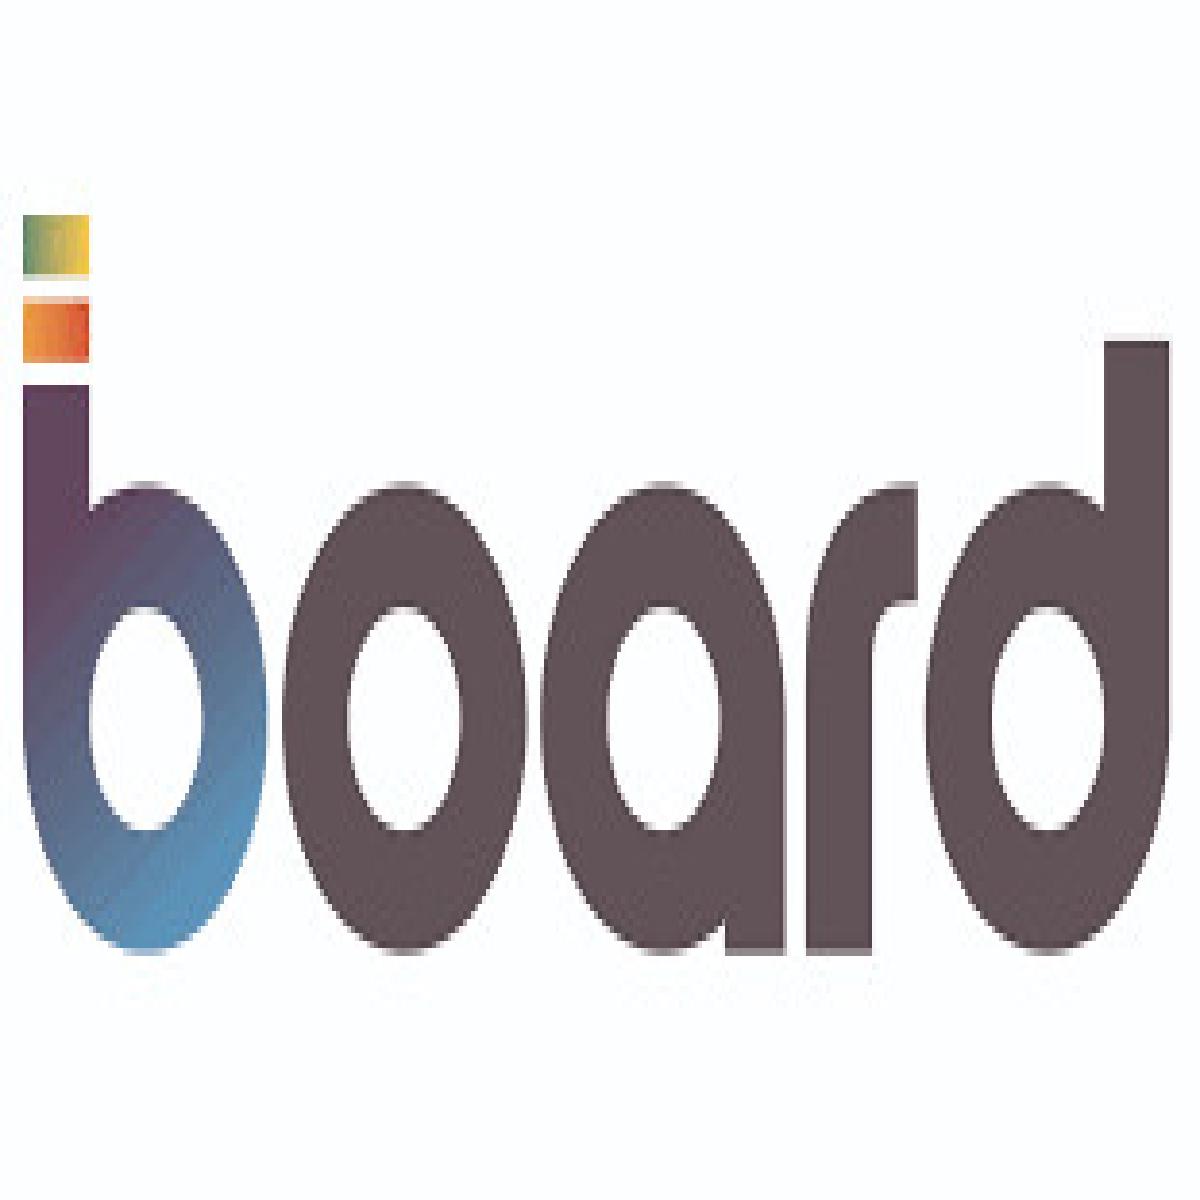 Board International Announces Strategic Alliance With Oliver Wight